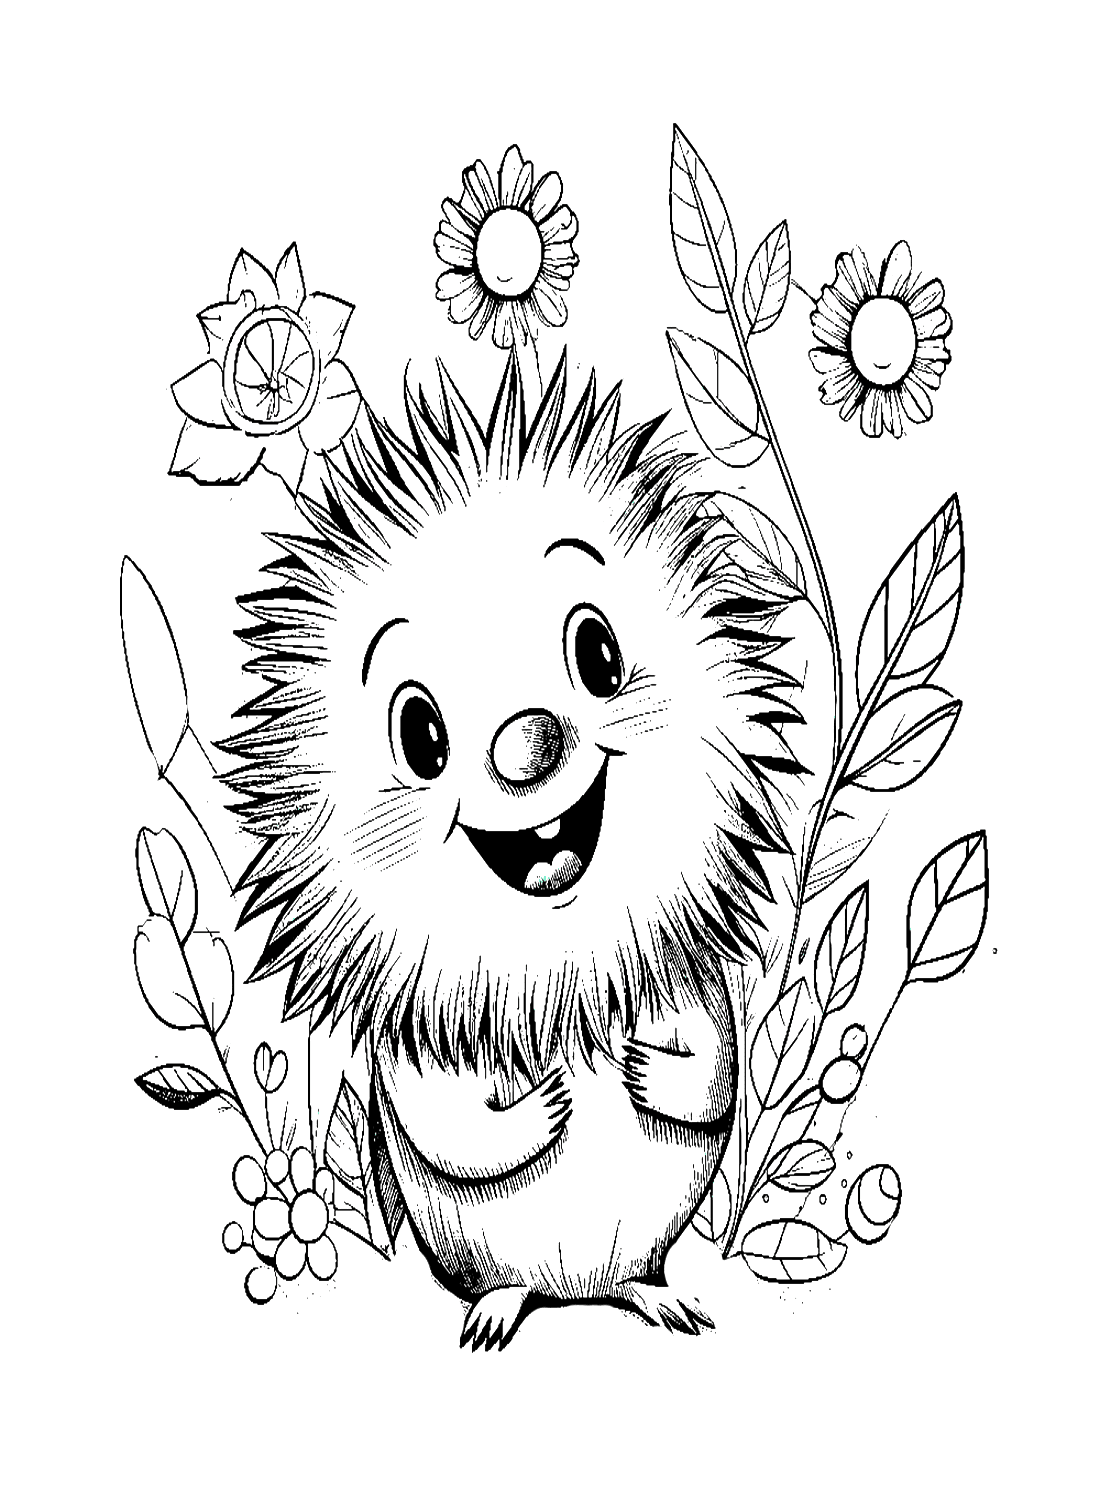 Happy Porcupine Coloring Page from Porcupine